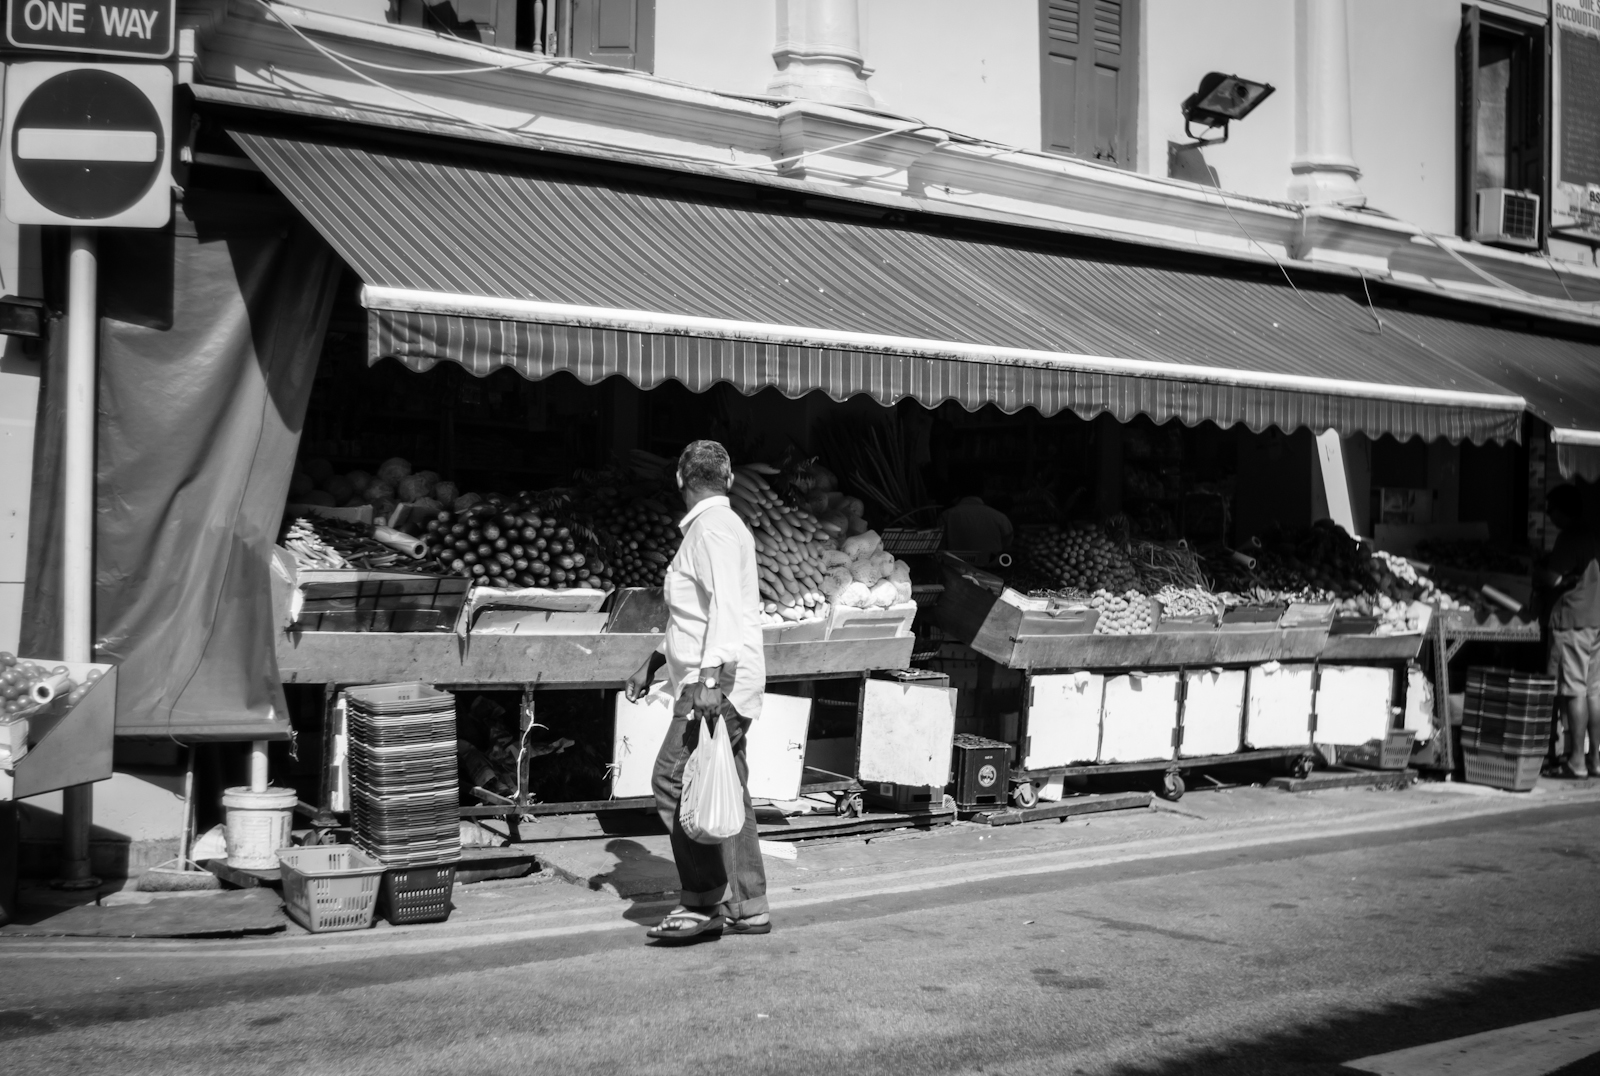 Street photography - Fruits stall